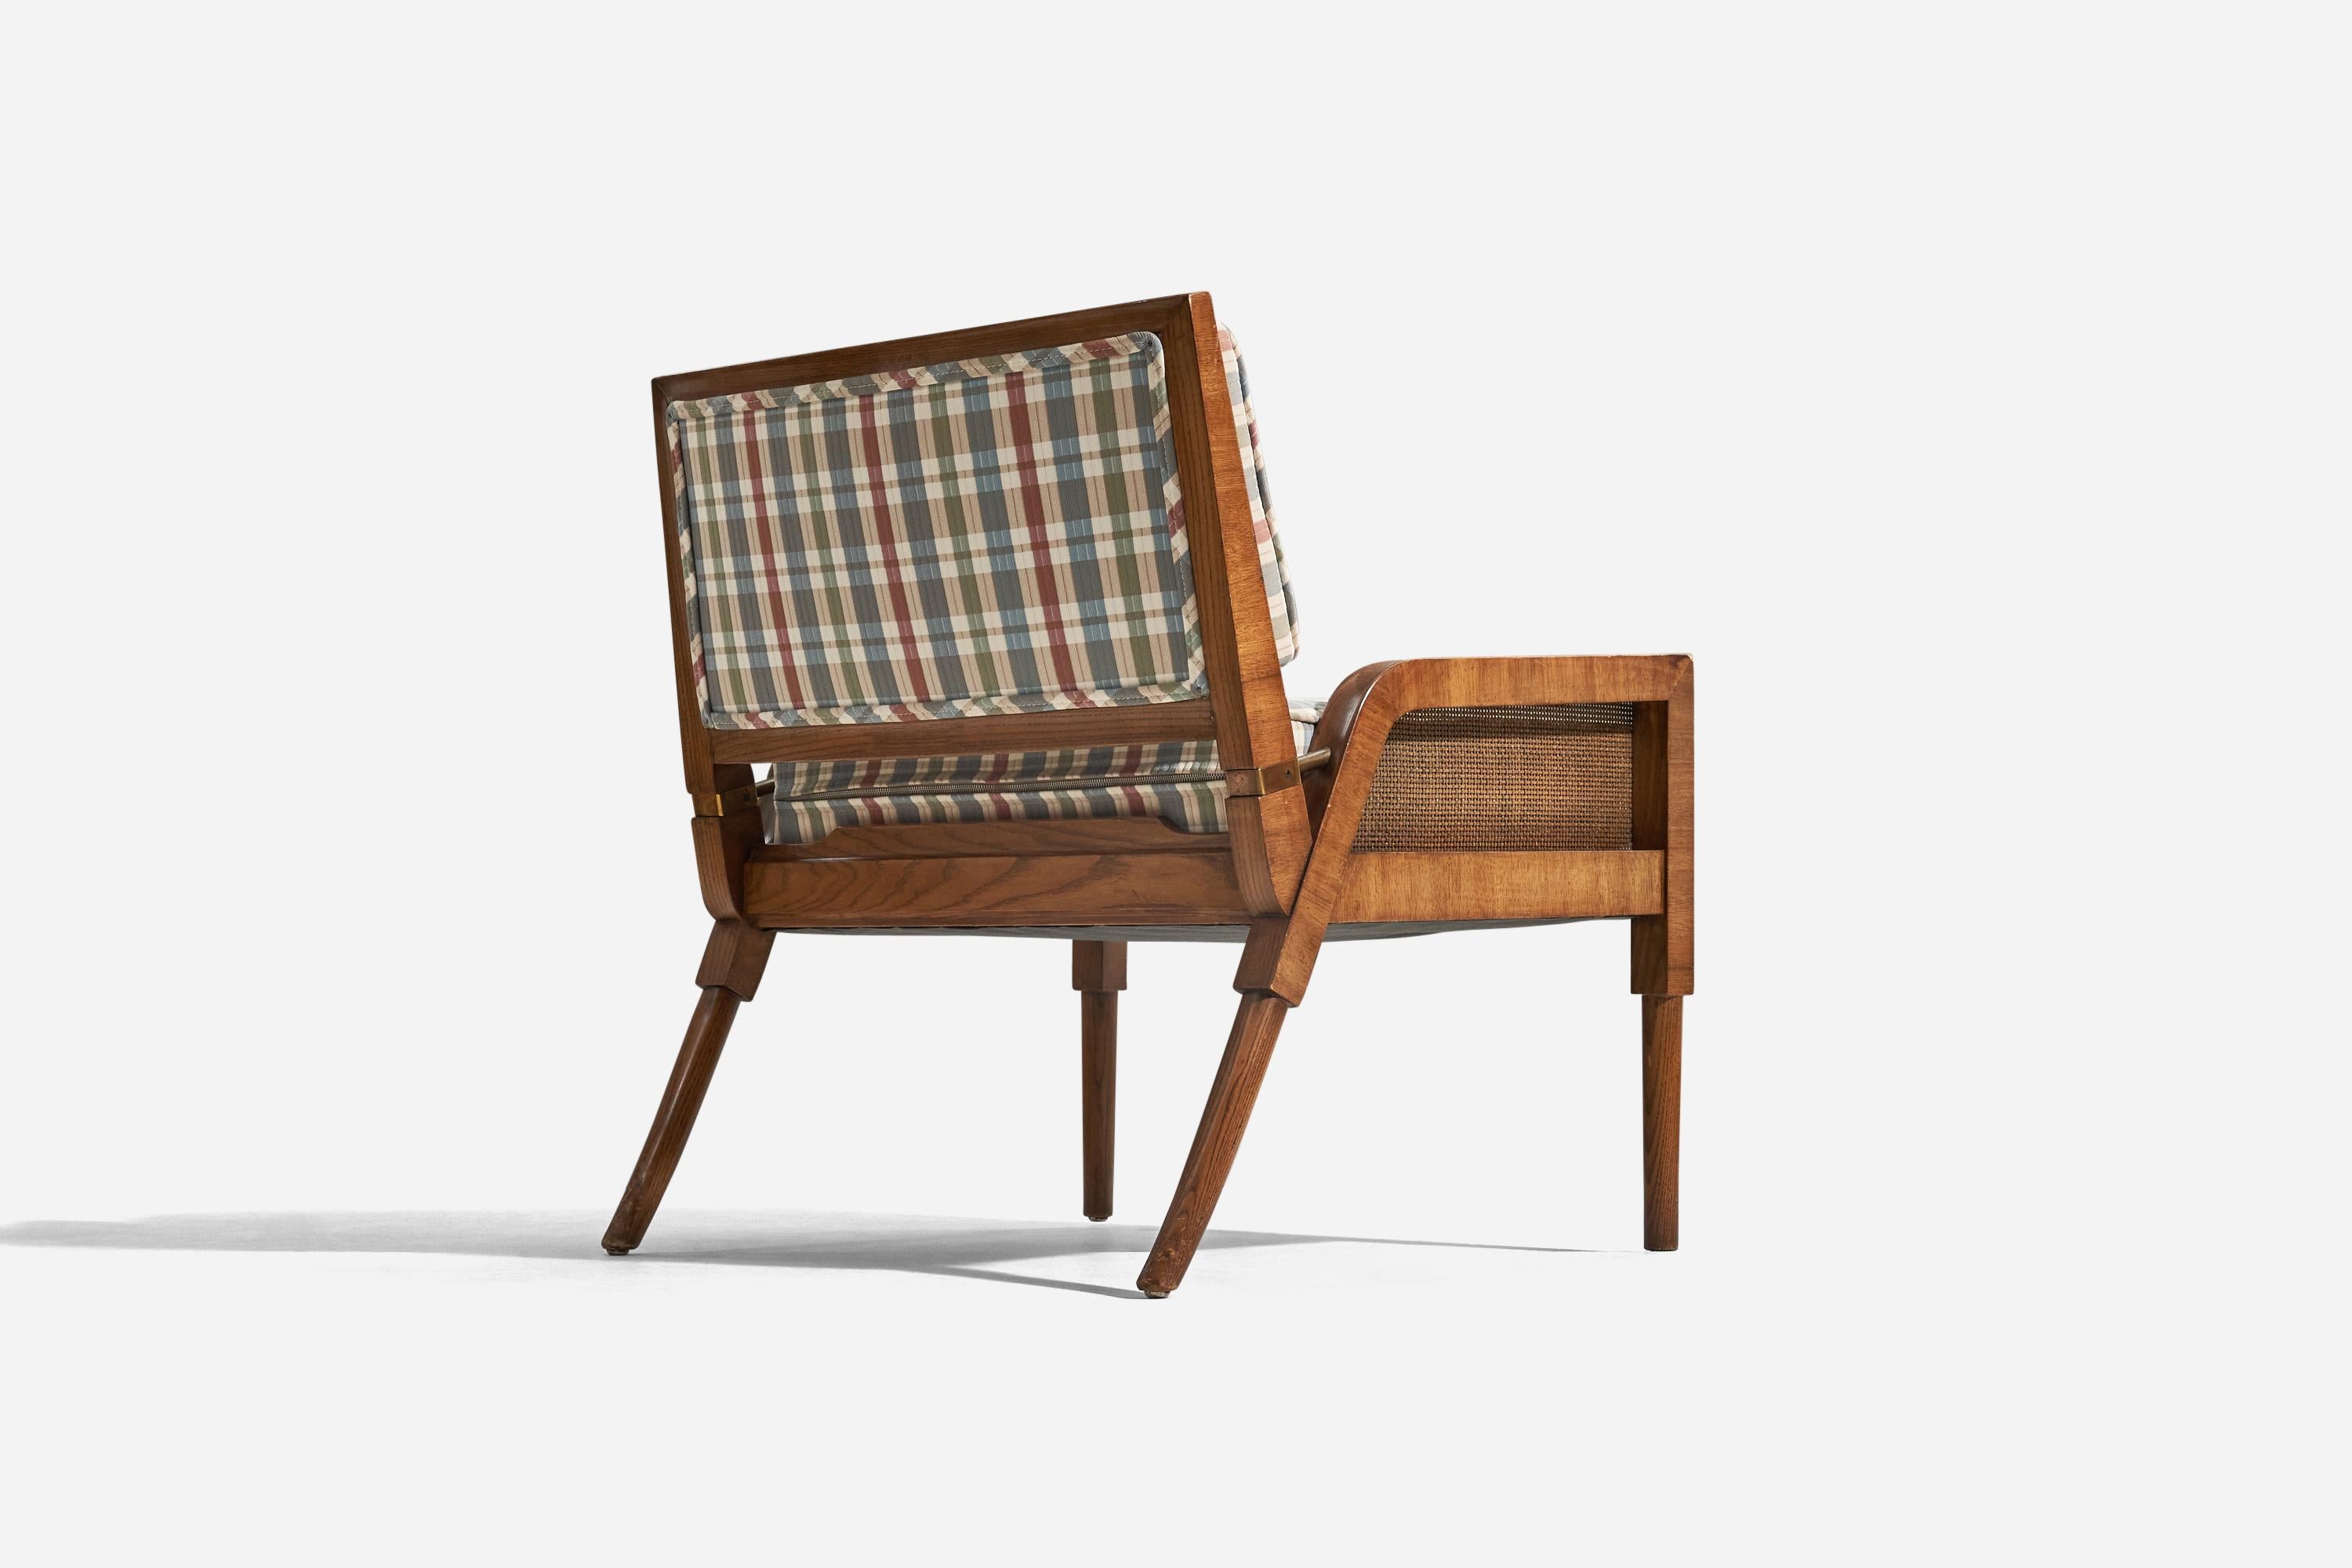 Mid-20th Century American Designer, Lounge Chairs, Oak, Fabric, Cane, United States, 1950s For Sale